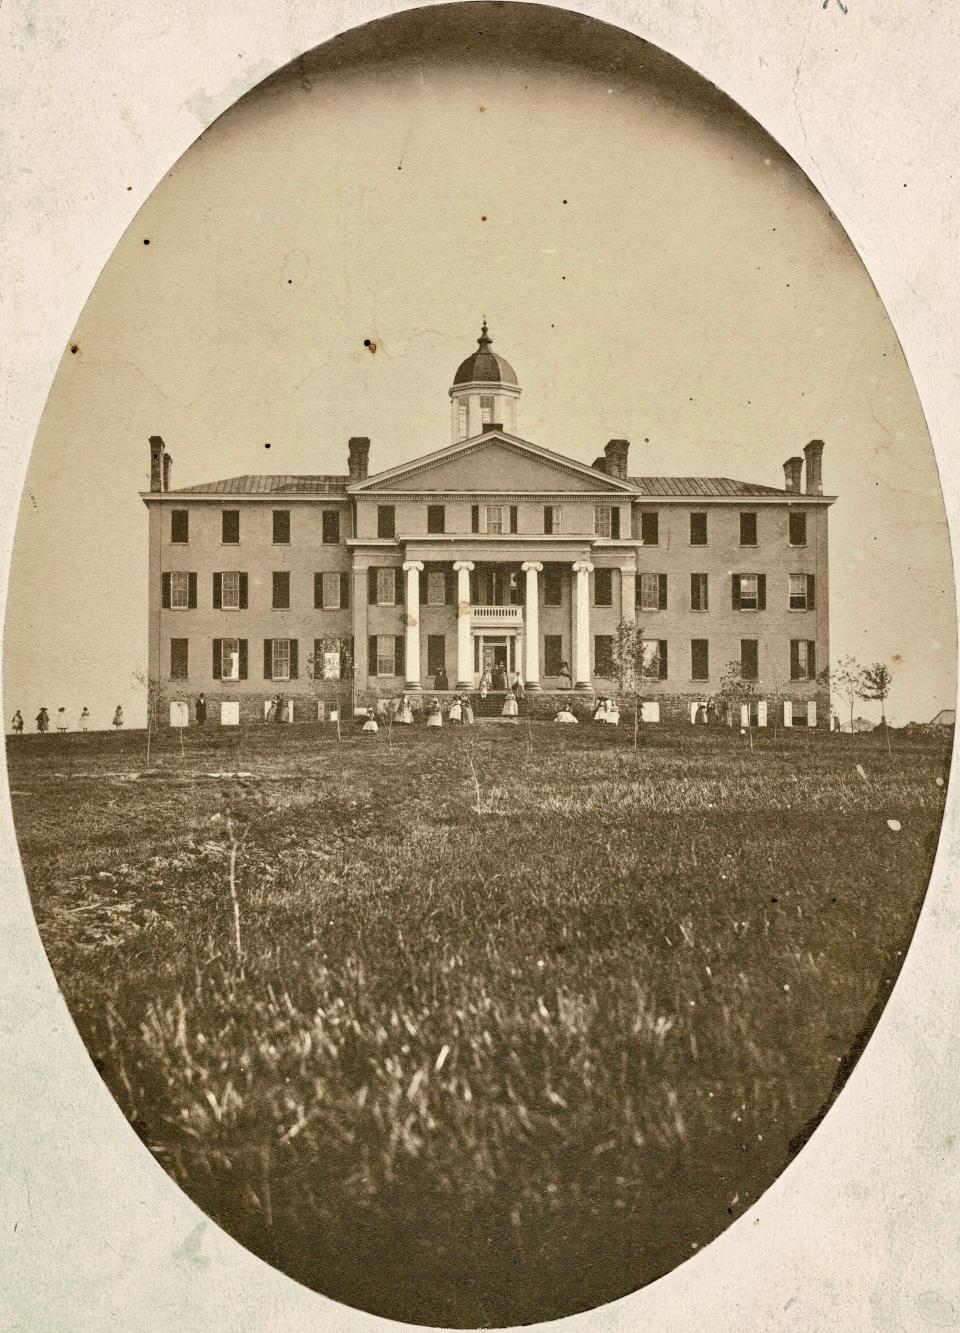 Students and teachers pose in front of the Hagerstown Female Seminary in the late 1860s. The school was later renamed Kee Mar College.